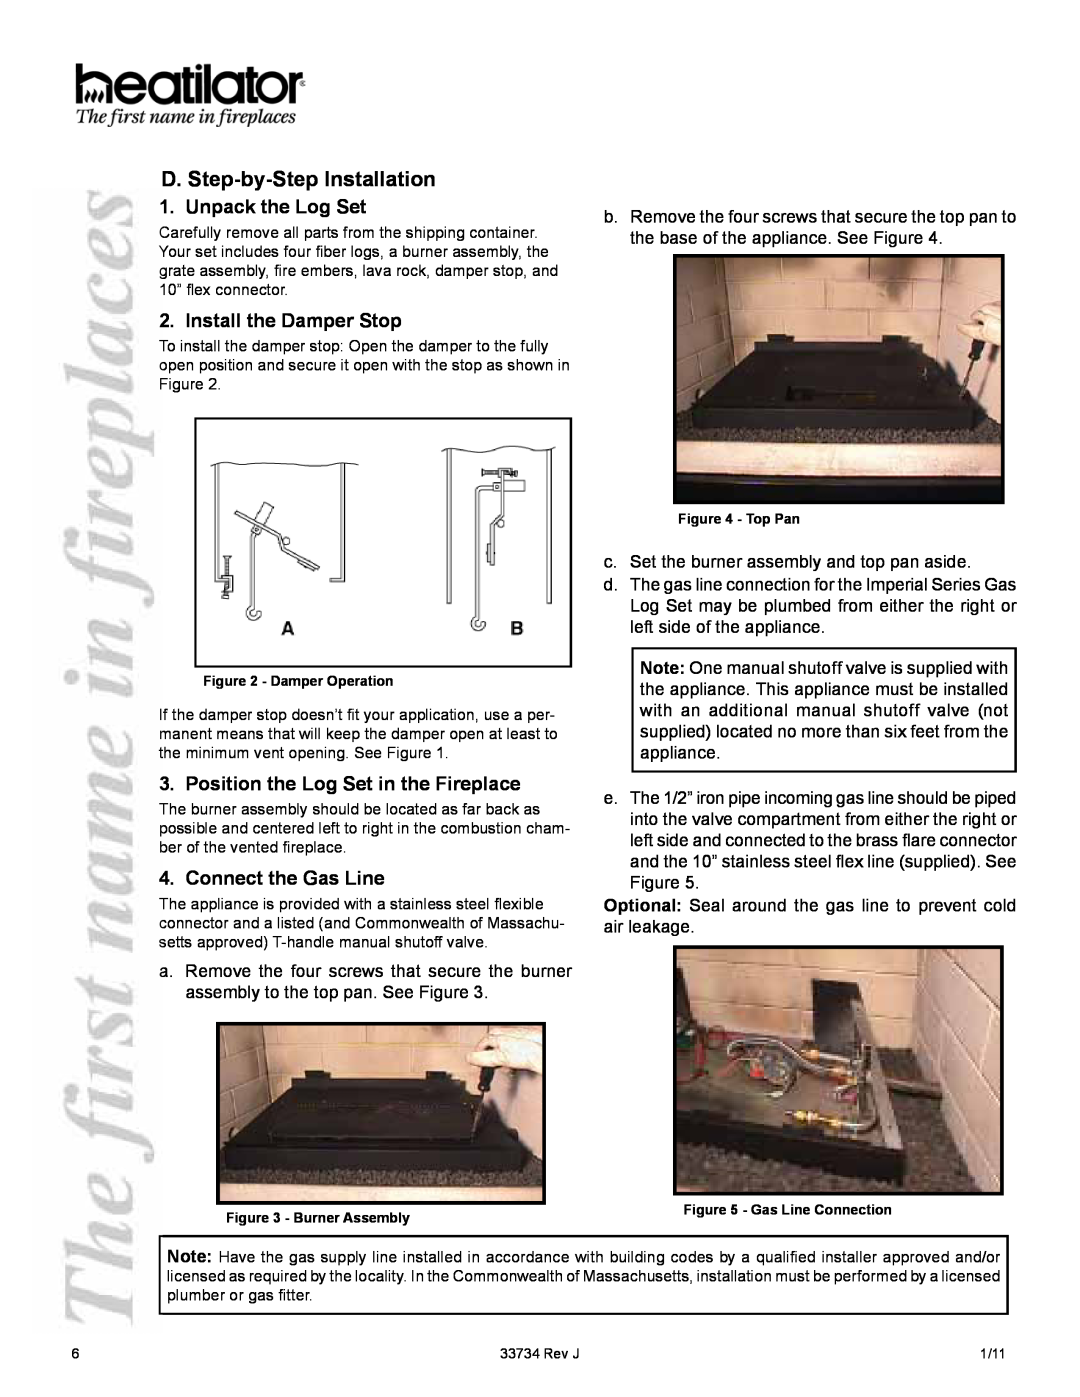 Hearth and Home Technologies FI36ML, FI42S, FI42M D. Step-by-Step Installation, Unpack the Log Set, Install the Damper Stop 